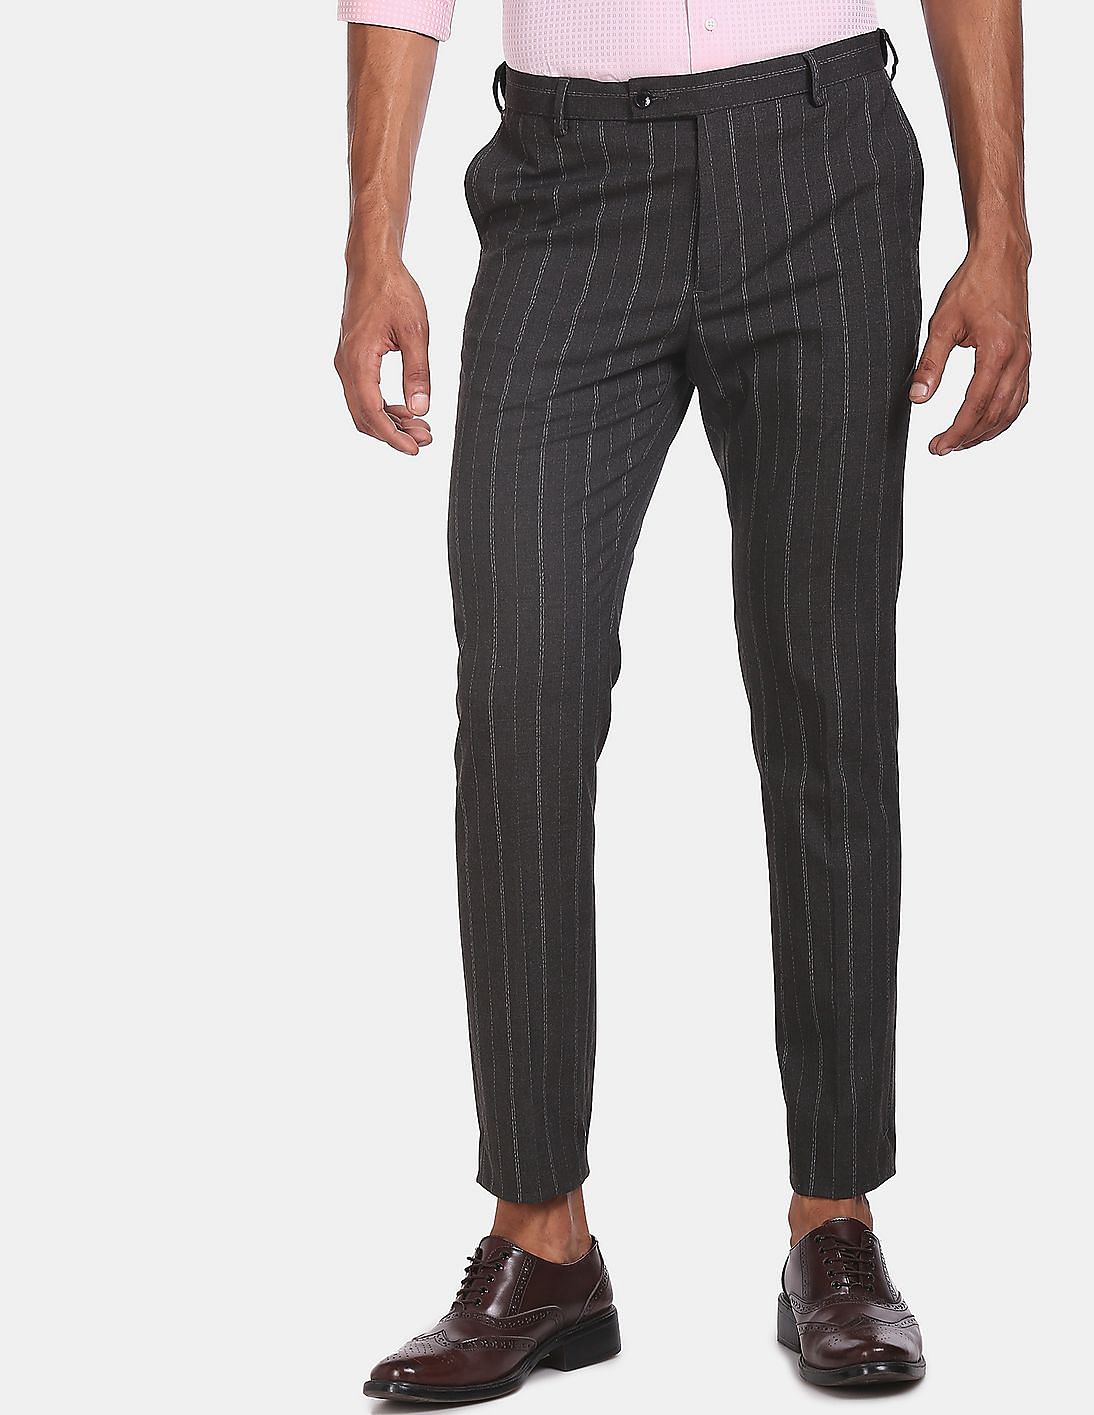 Buy Sojanya Since 1958 Mens Cotton Blend Grey  OffWhite Striped Formal  Trousers Size 30 at Amazonin